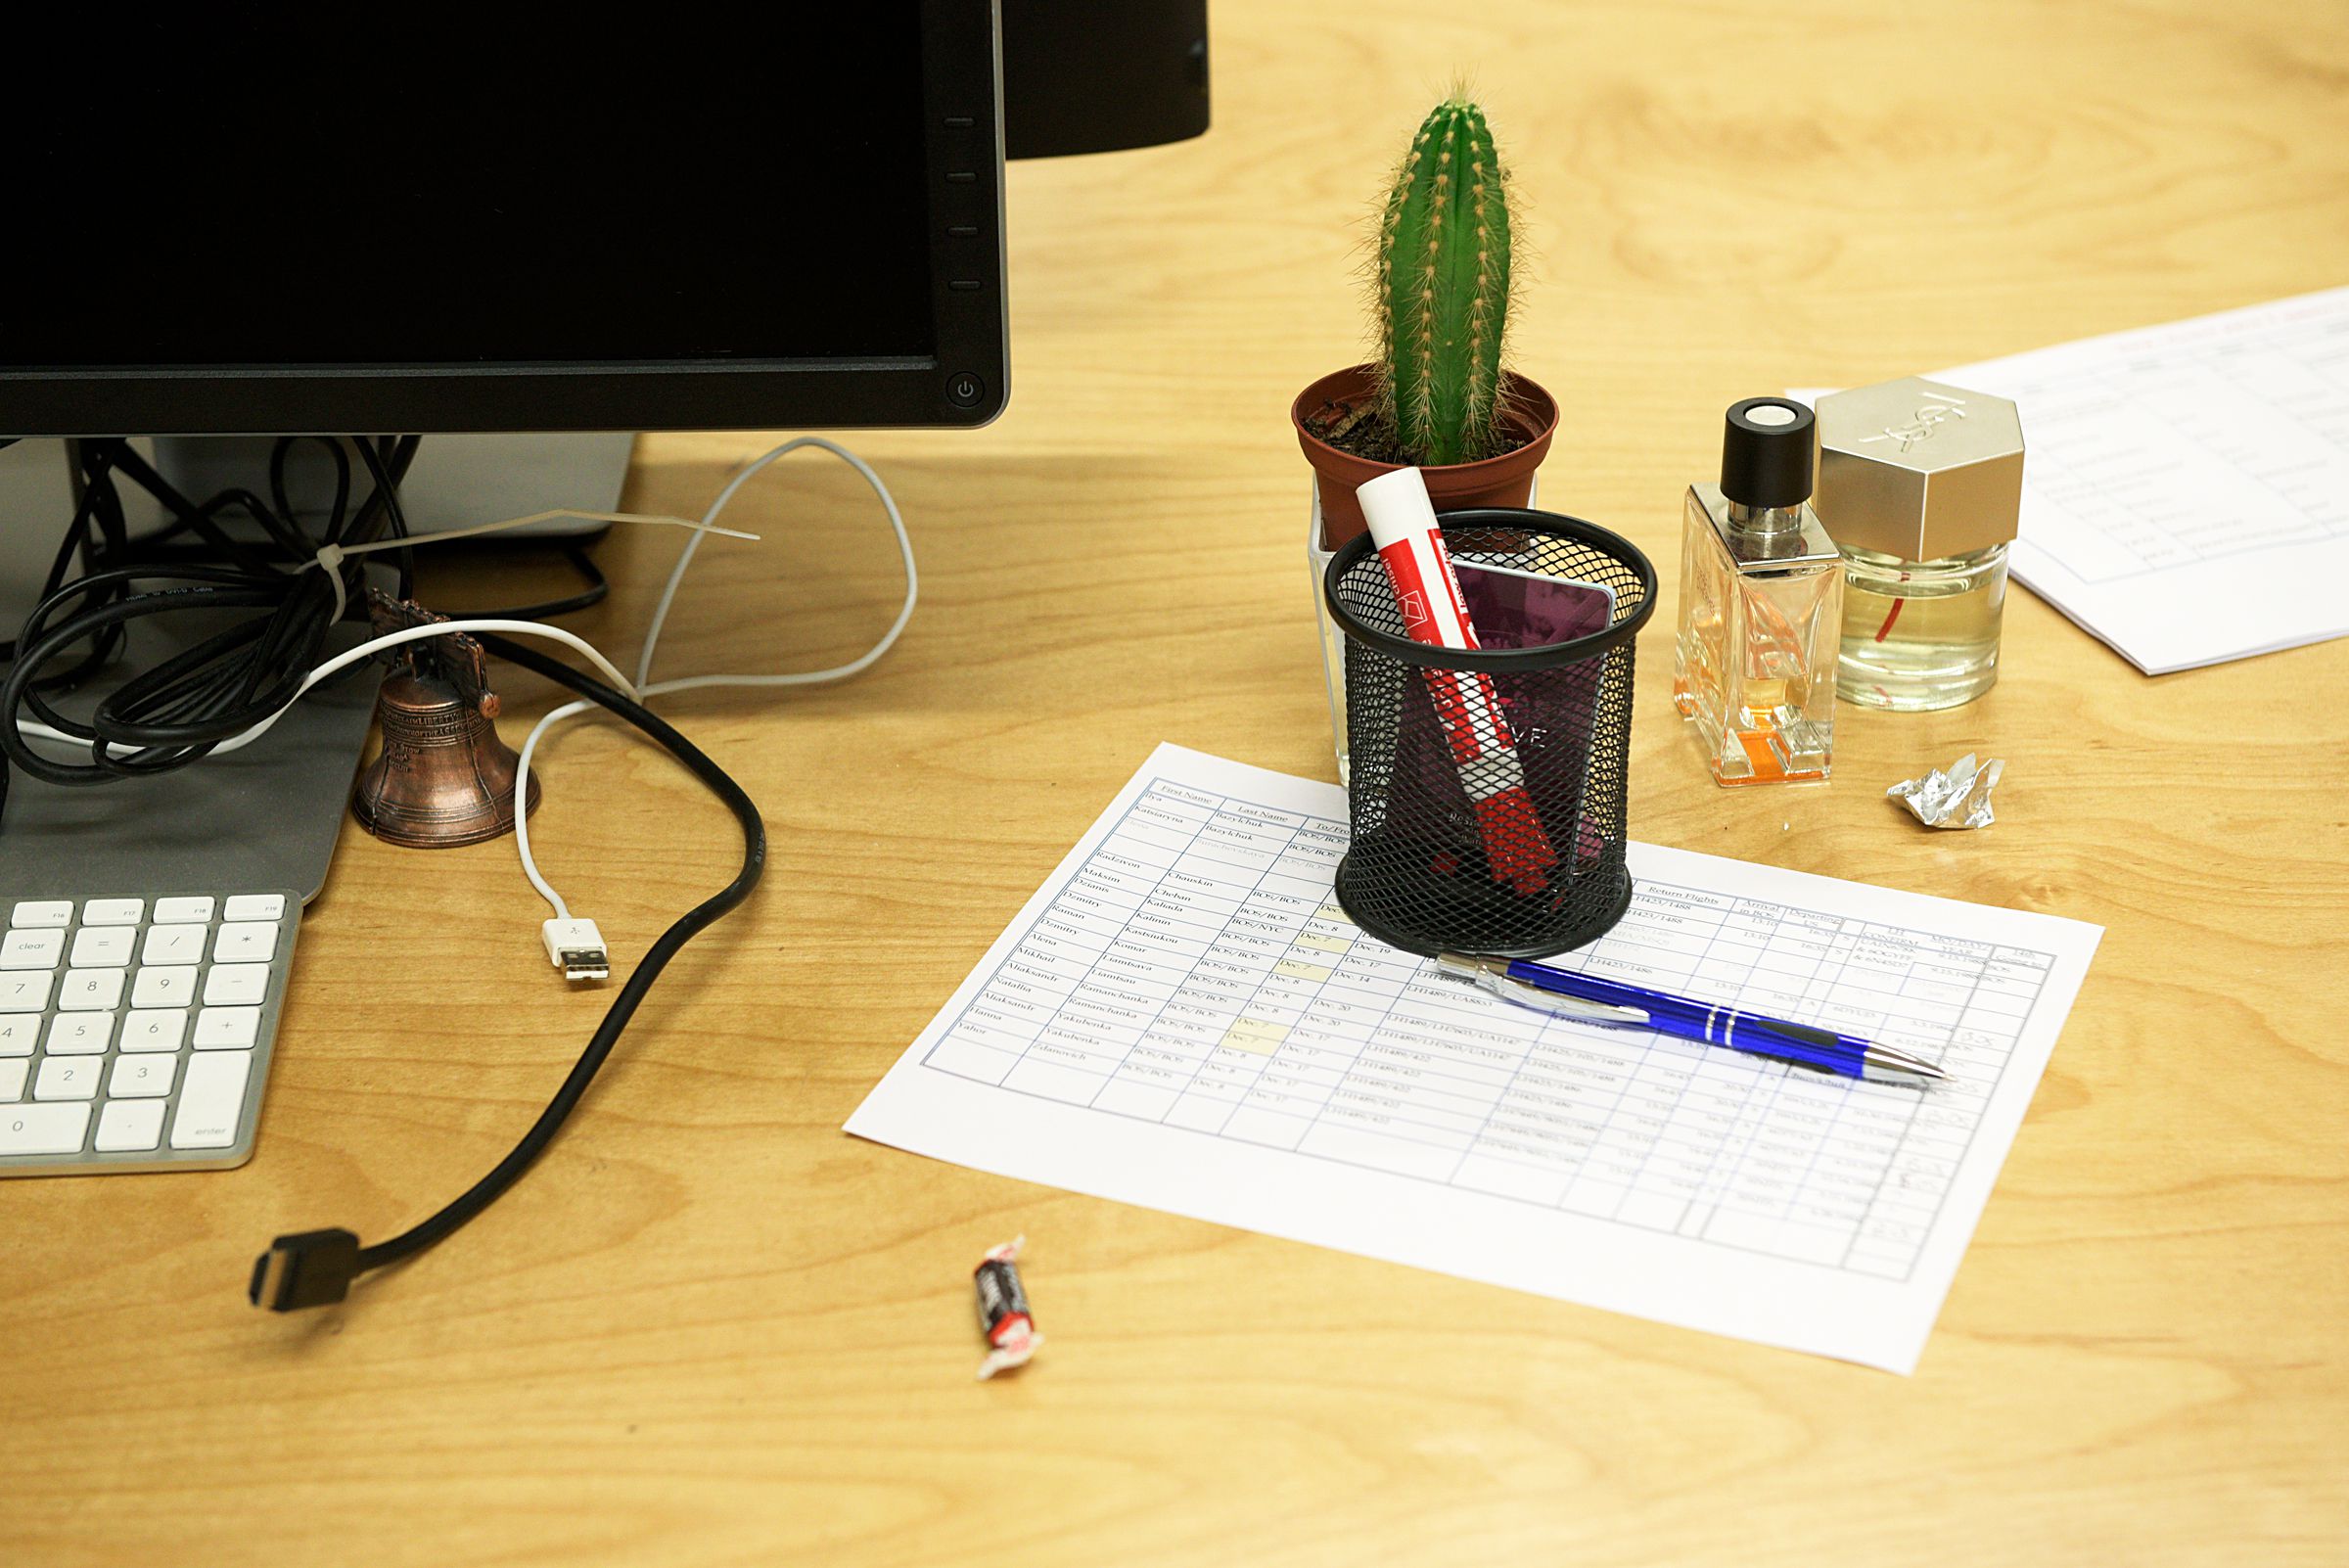 A cactus, a tootsie roll, perfume, a miniature of the Liberty Bell, sit at a work space in the Appcast office in the Whitman Communications Building in Lebanon, N.H., Thursday October 27, 2016. (Valley News - James M. Patterson) Copyright Valley News. May not be reprinted or used online without permission. Send requests to permission@vnews.com.